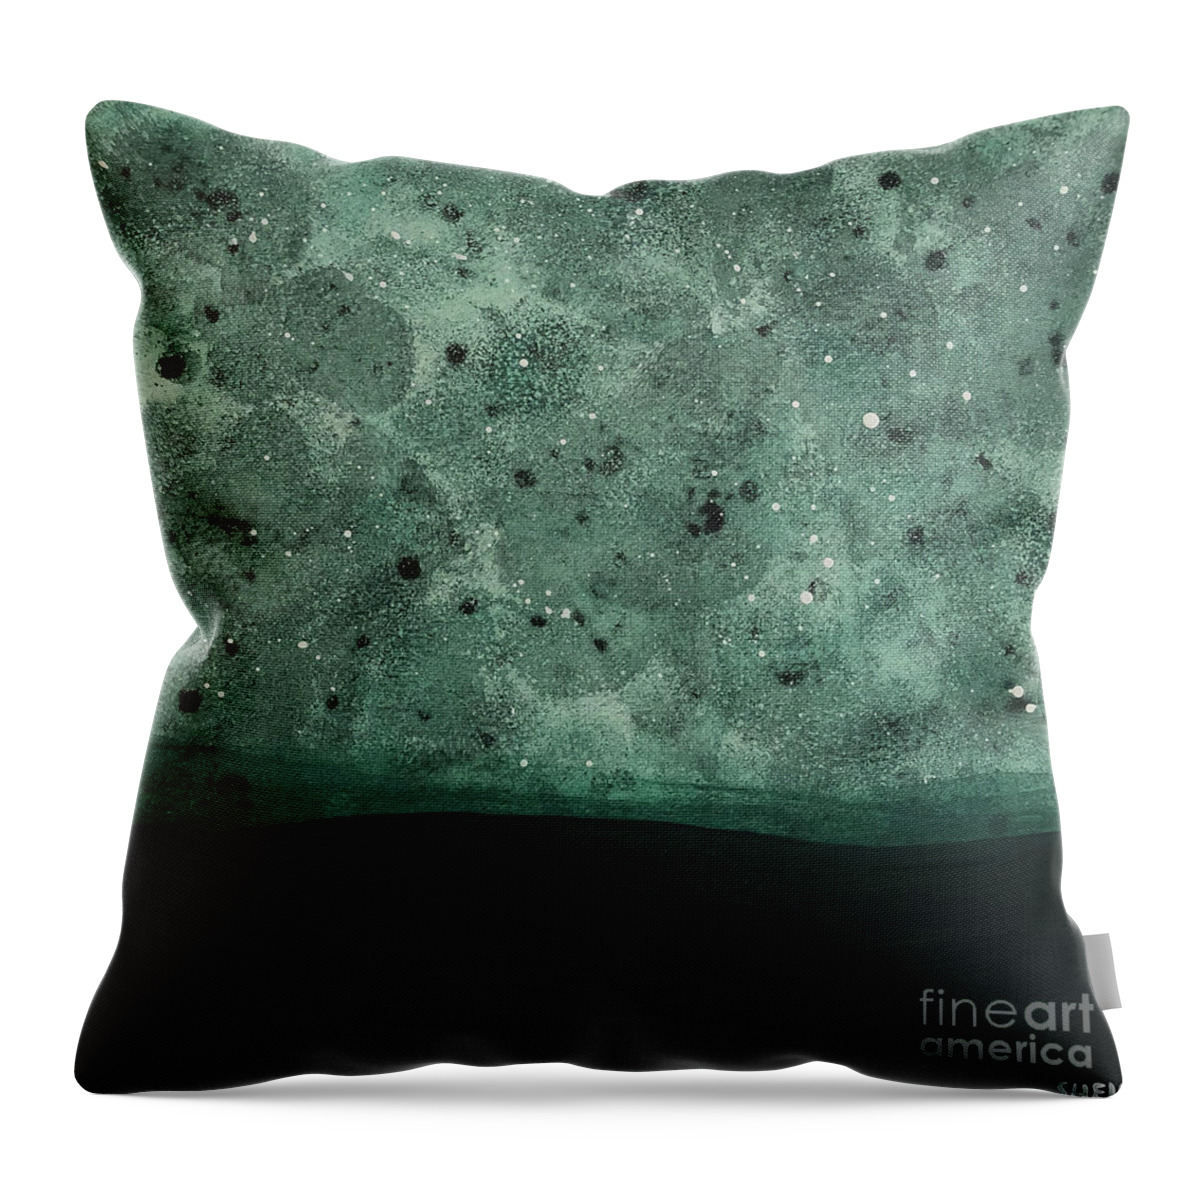 Seed Throw Pillow featuring the painting Seed by Amanda Sheil